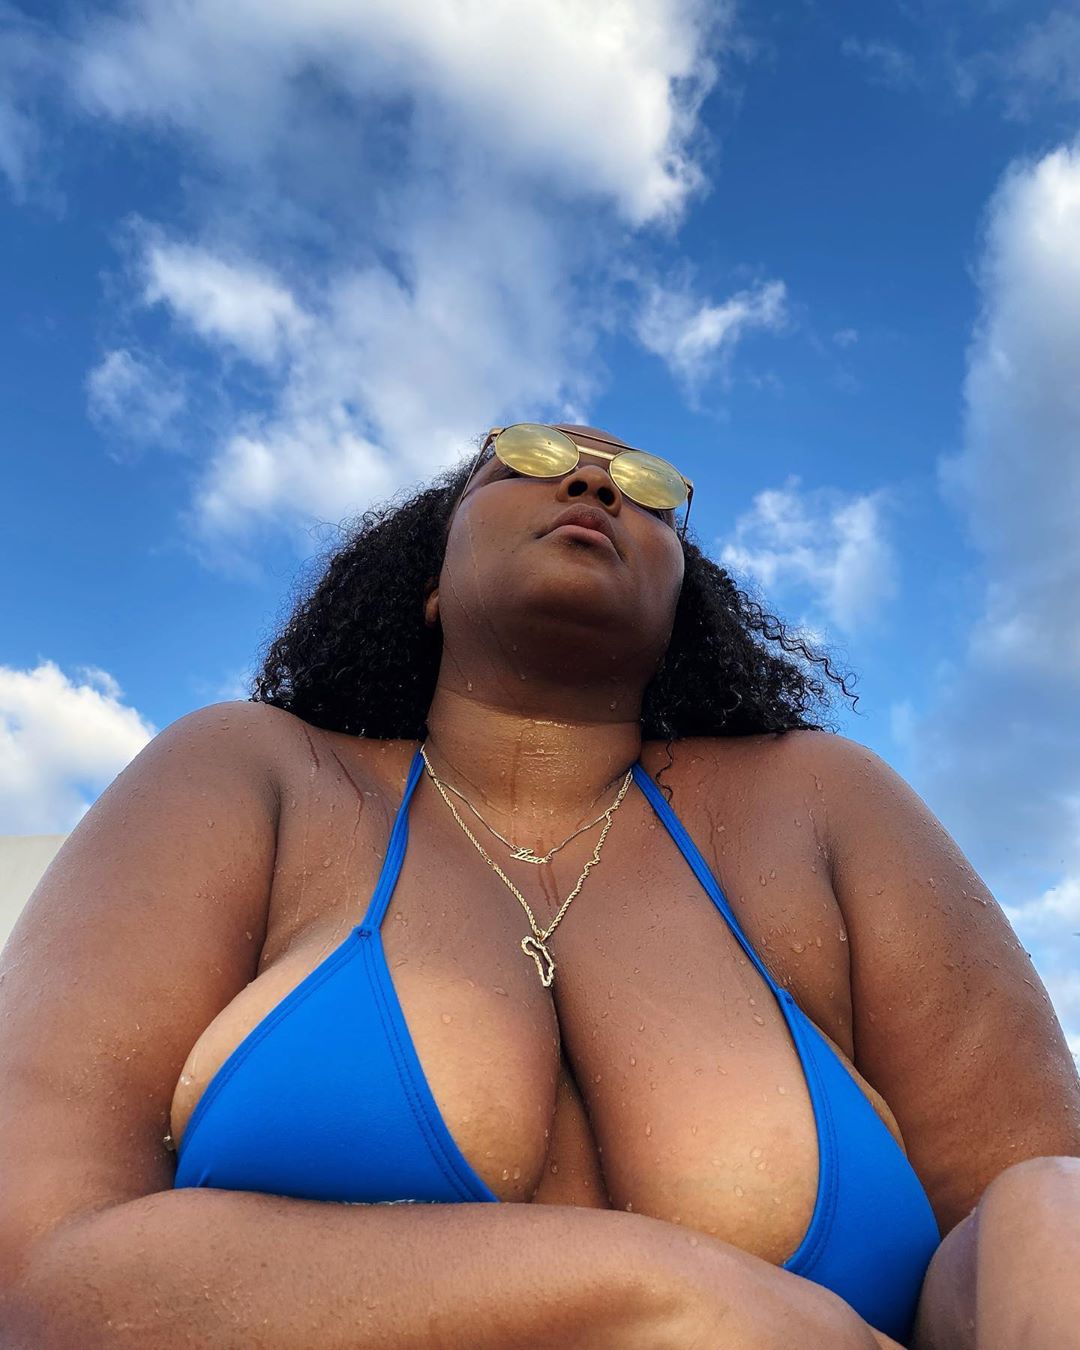 TikTok Restores Swimsuit Video Of Lizzo After She Accuses The App Of Taking It Down